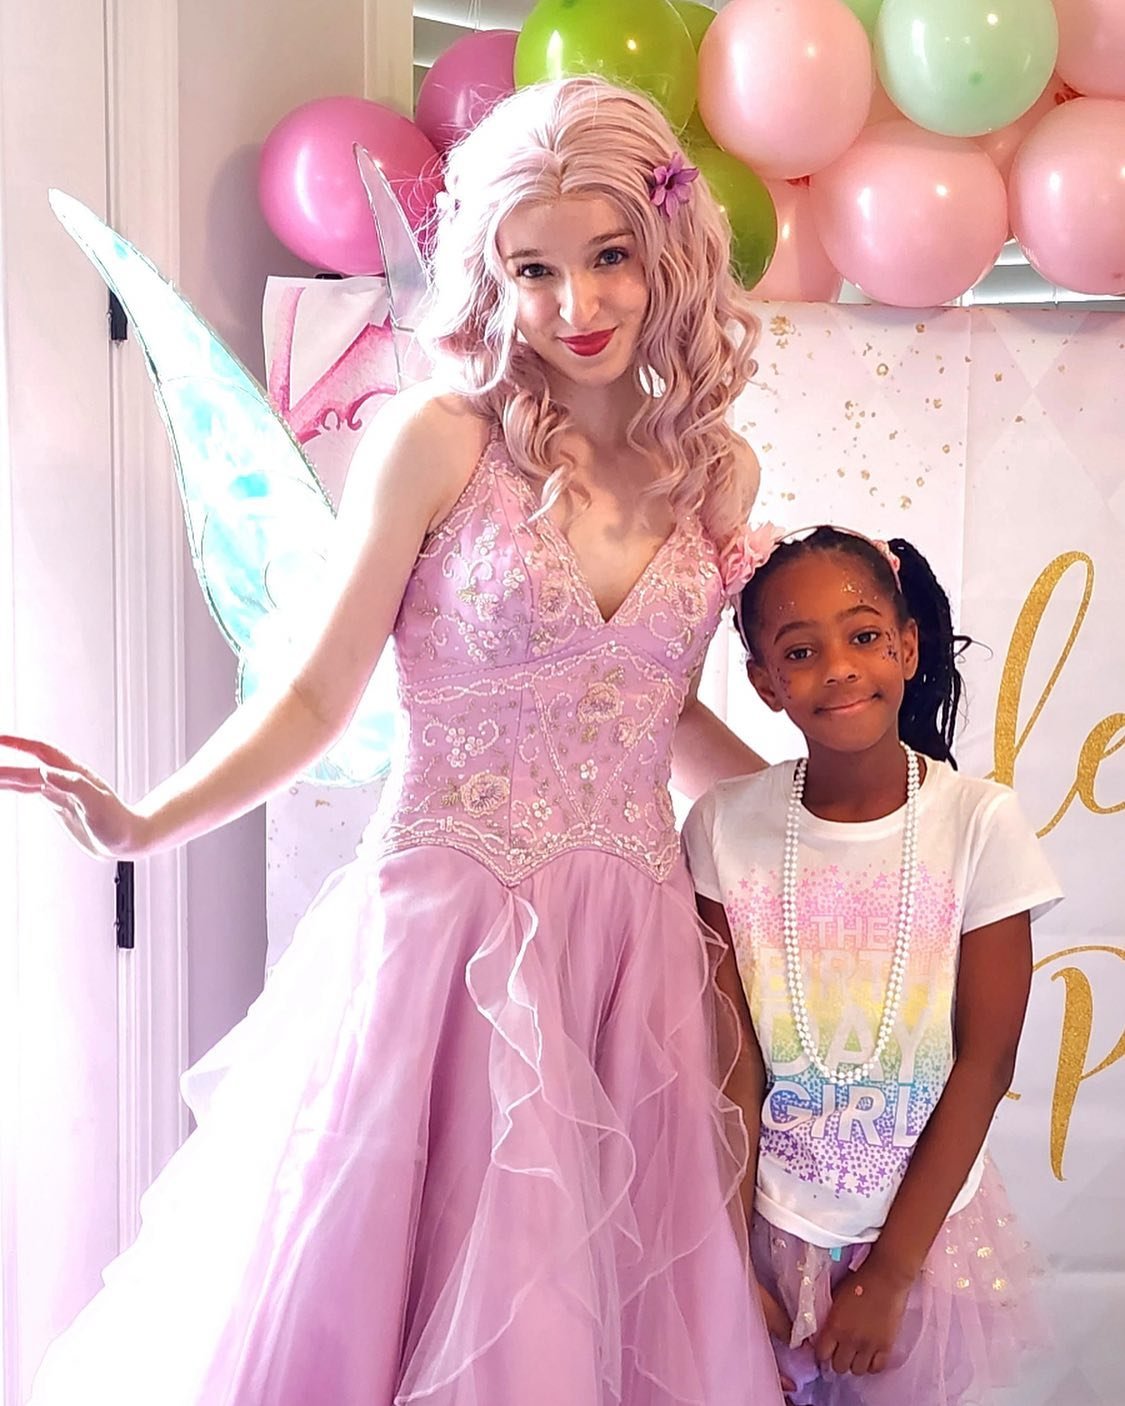 What&rsquo;s better than an enchanted tea party? An enchanted tea party with a real fairy! 🫖🌸✨ The Fairy Queen had a magical time celebrating Princess Milani&rsquo;s 9th birthday! 
.
.
#princessparty #birthdaypartyideas #teaparty #fairy #fairycospl